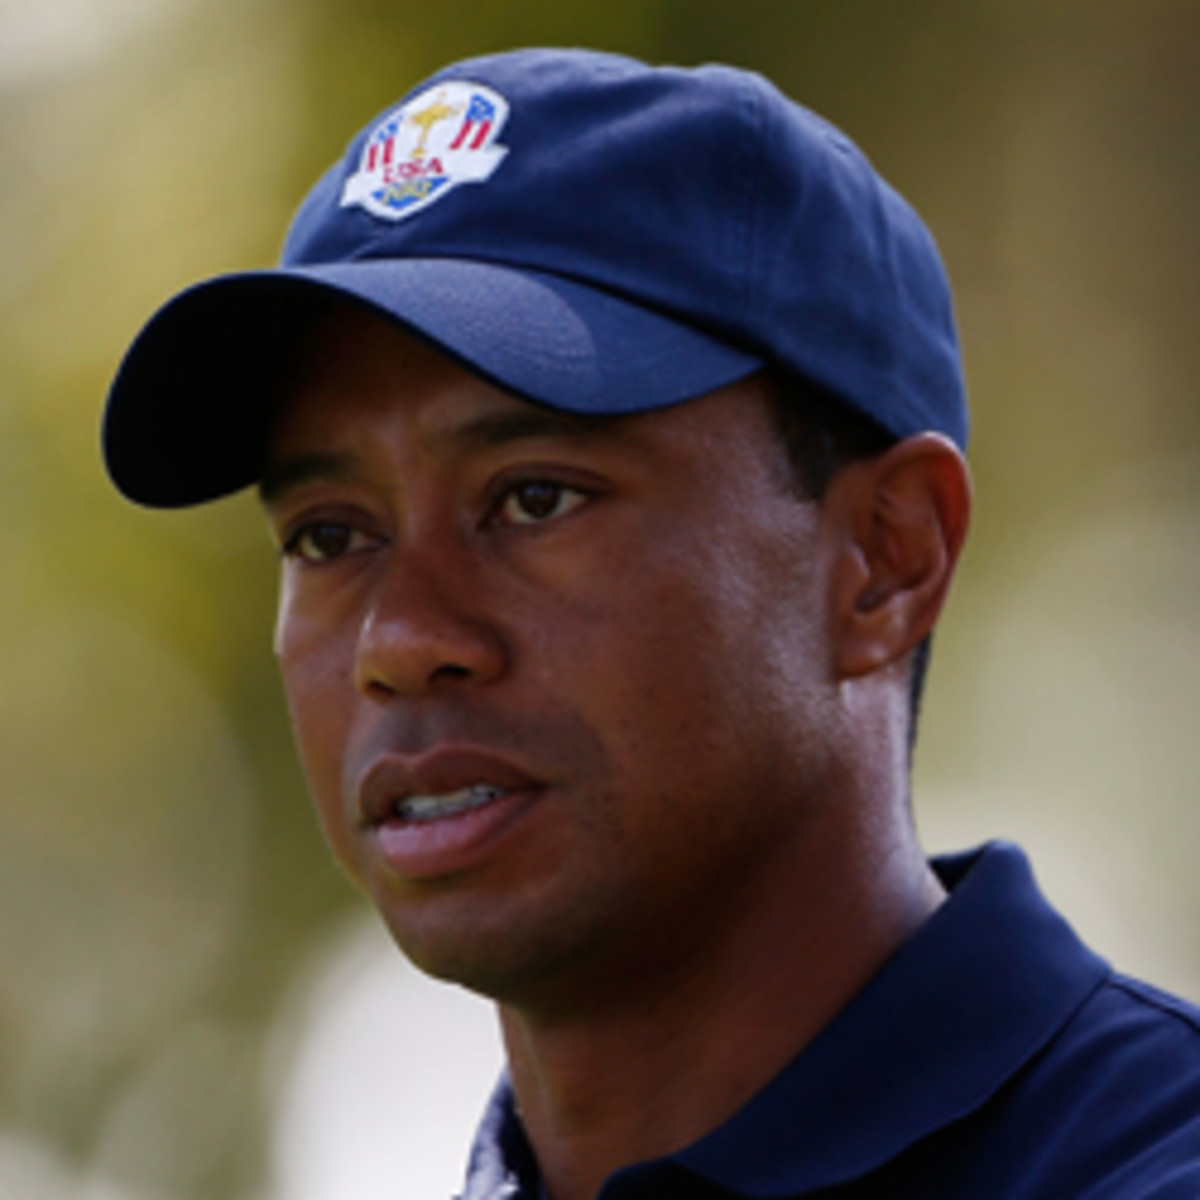 Tiger Woods said he wouldn't call in a rules violation from home. (Jamie Squire/Getty Images)